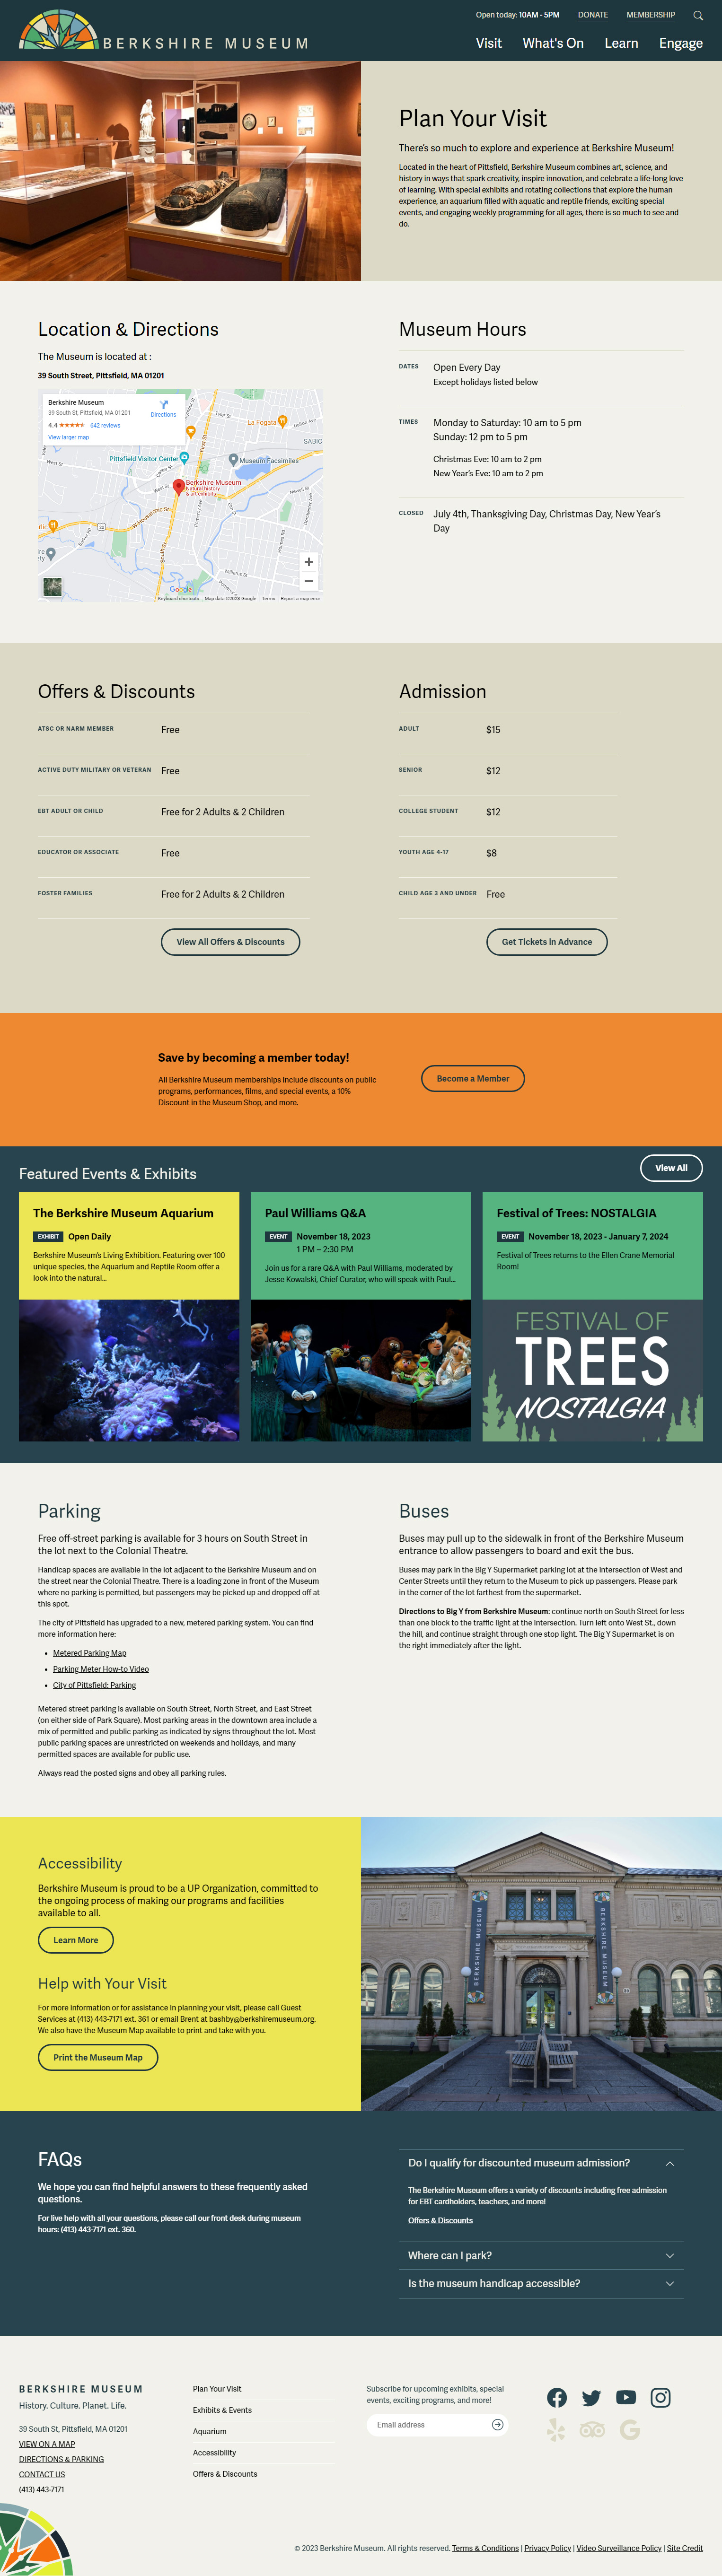 The completed website for Berkshire Museum